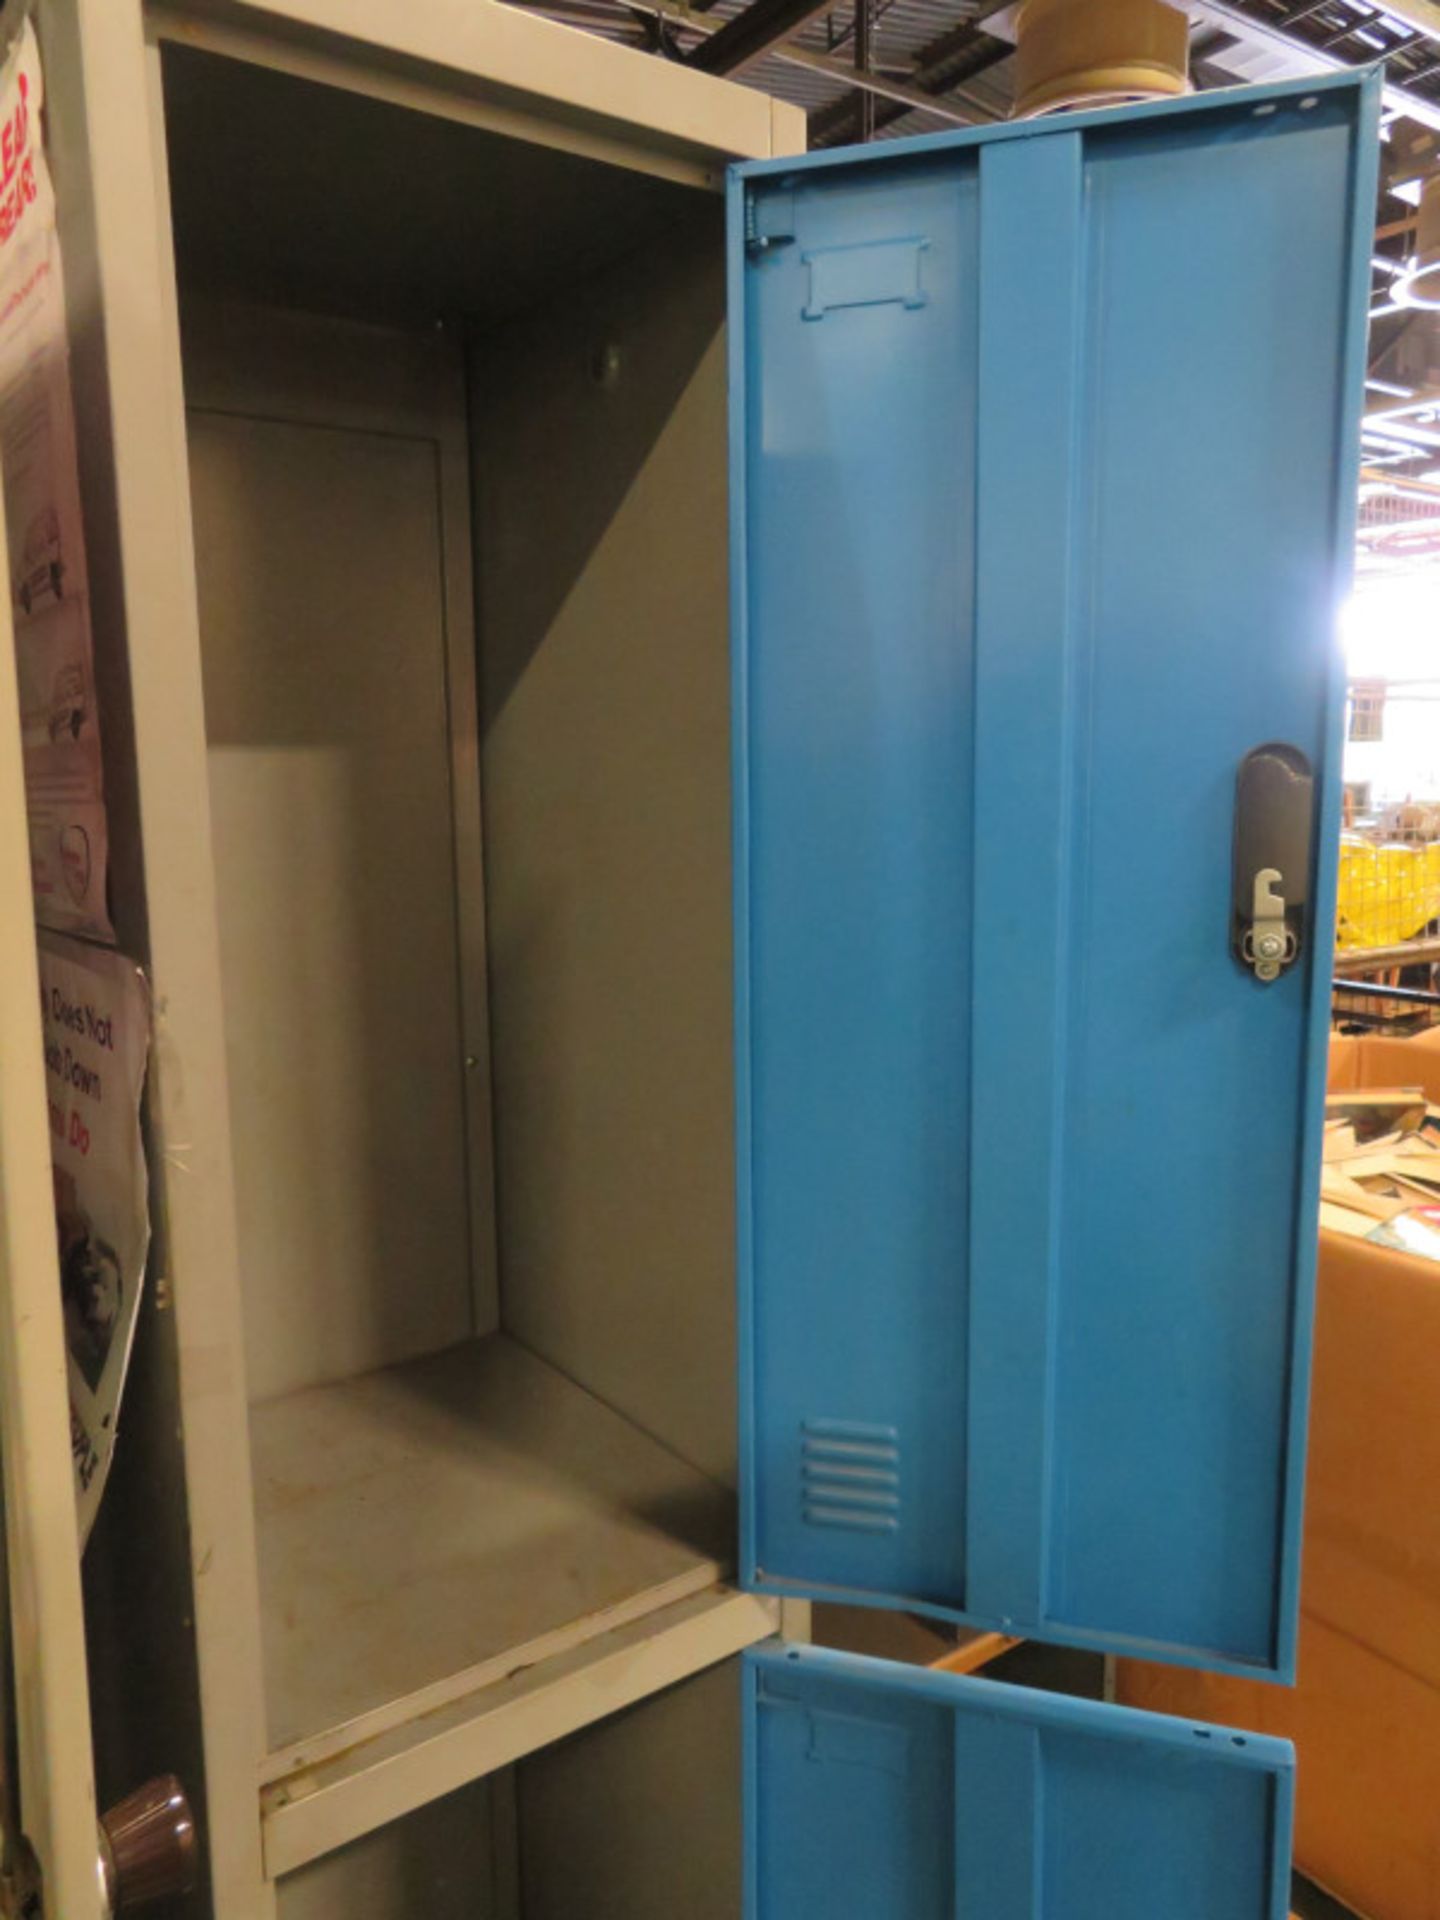 2x 2 bank personnel lockers - Image 4 of 8